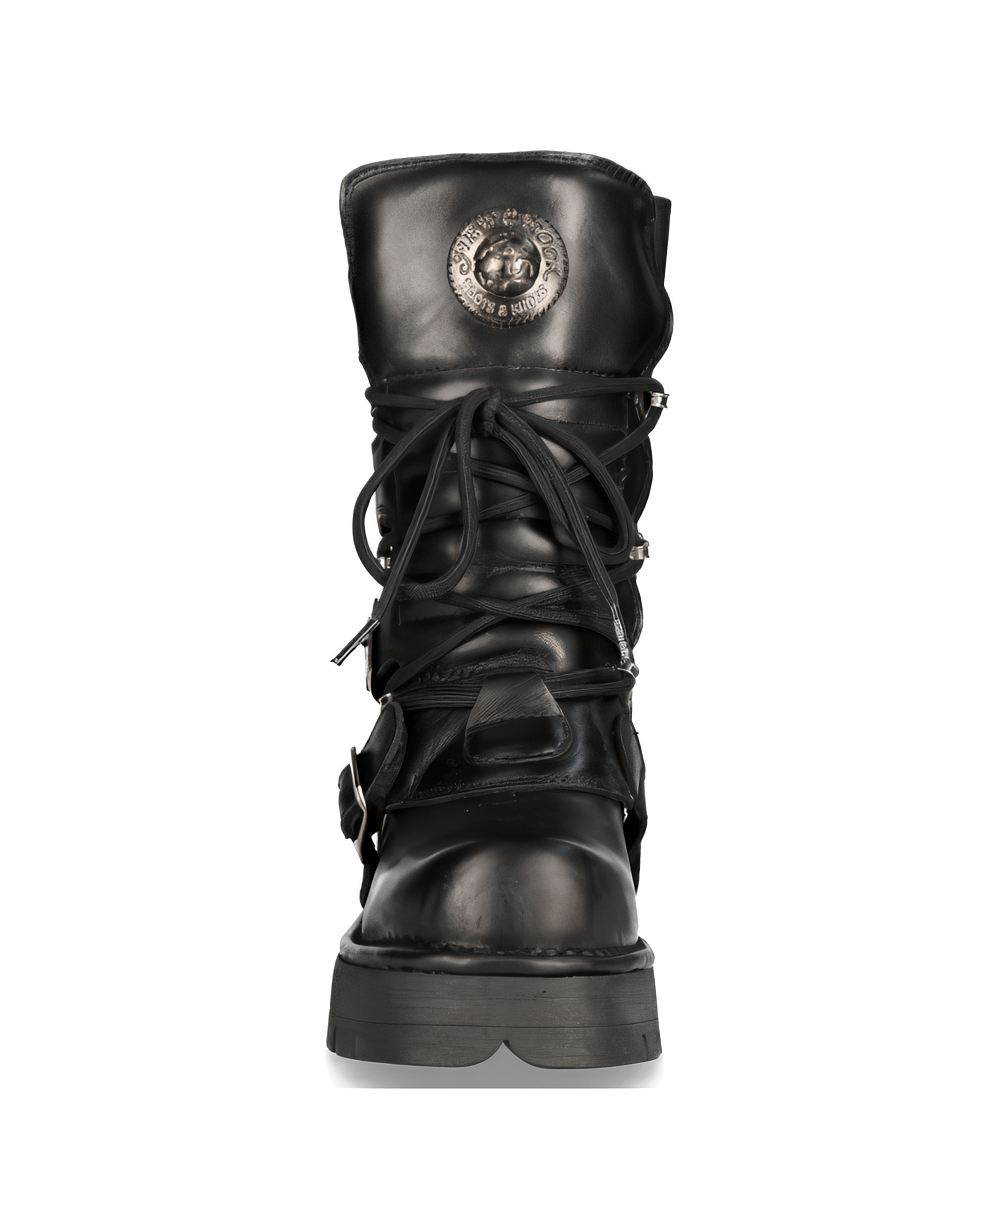 NEW ROCK Gothic Style Lace-Up Boots with Metallic Accents